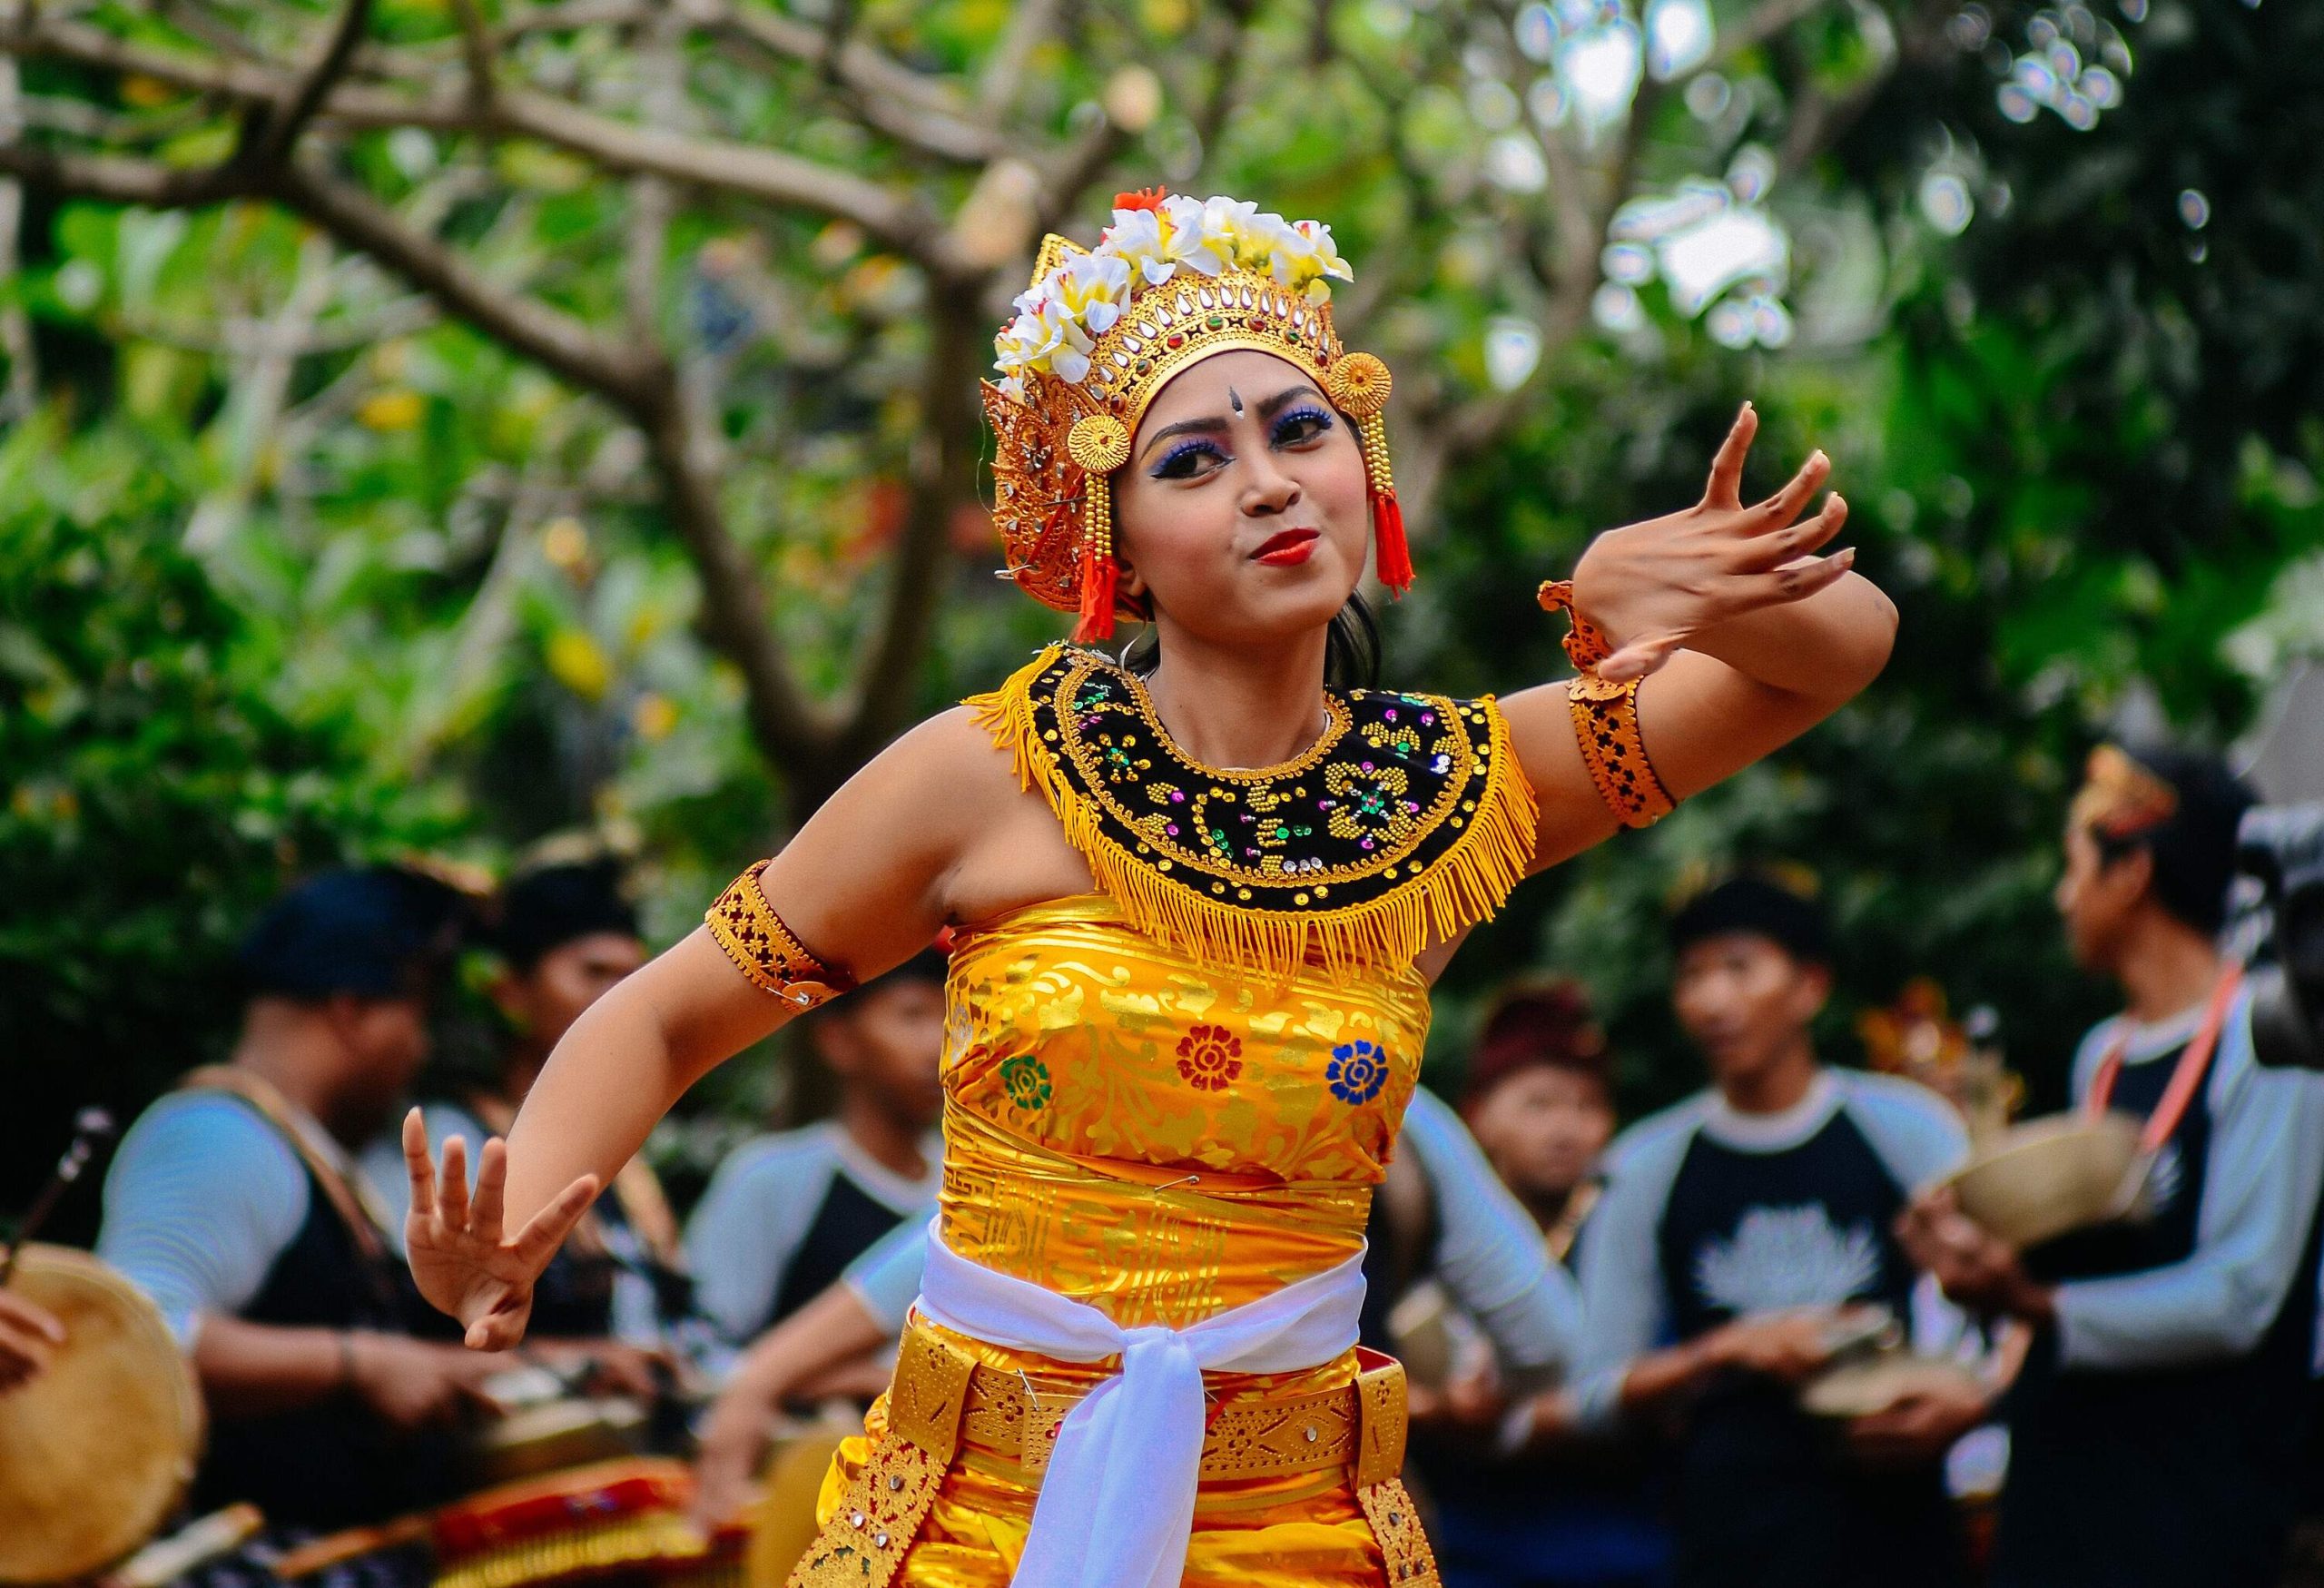 A woman dancing wearing a traditional Balinese costume, accompanied by a band playing behind her.